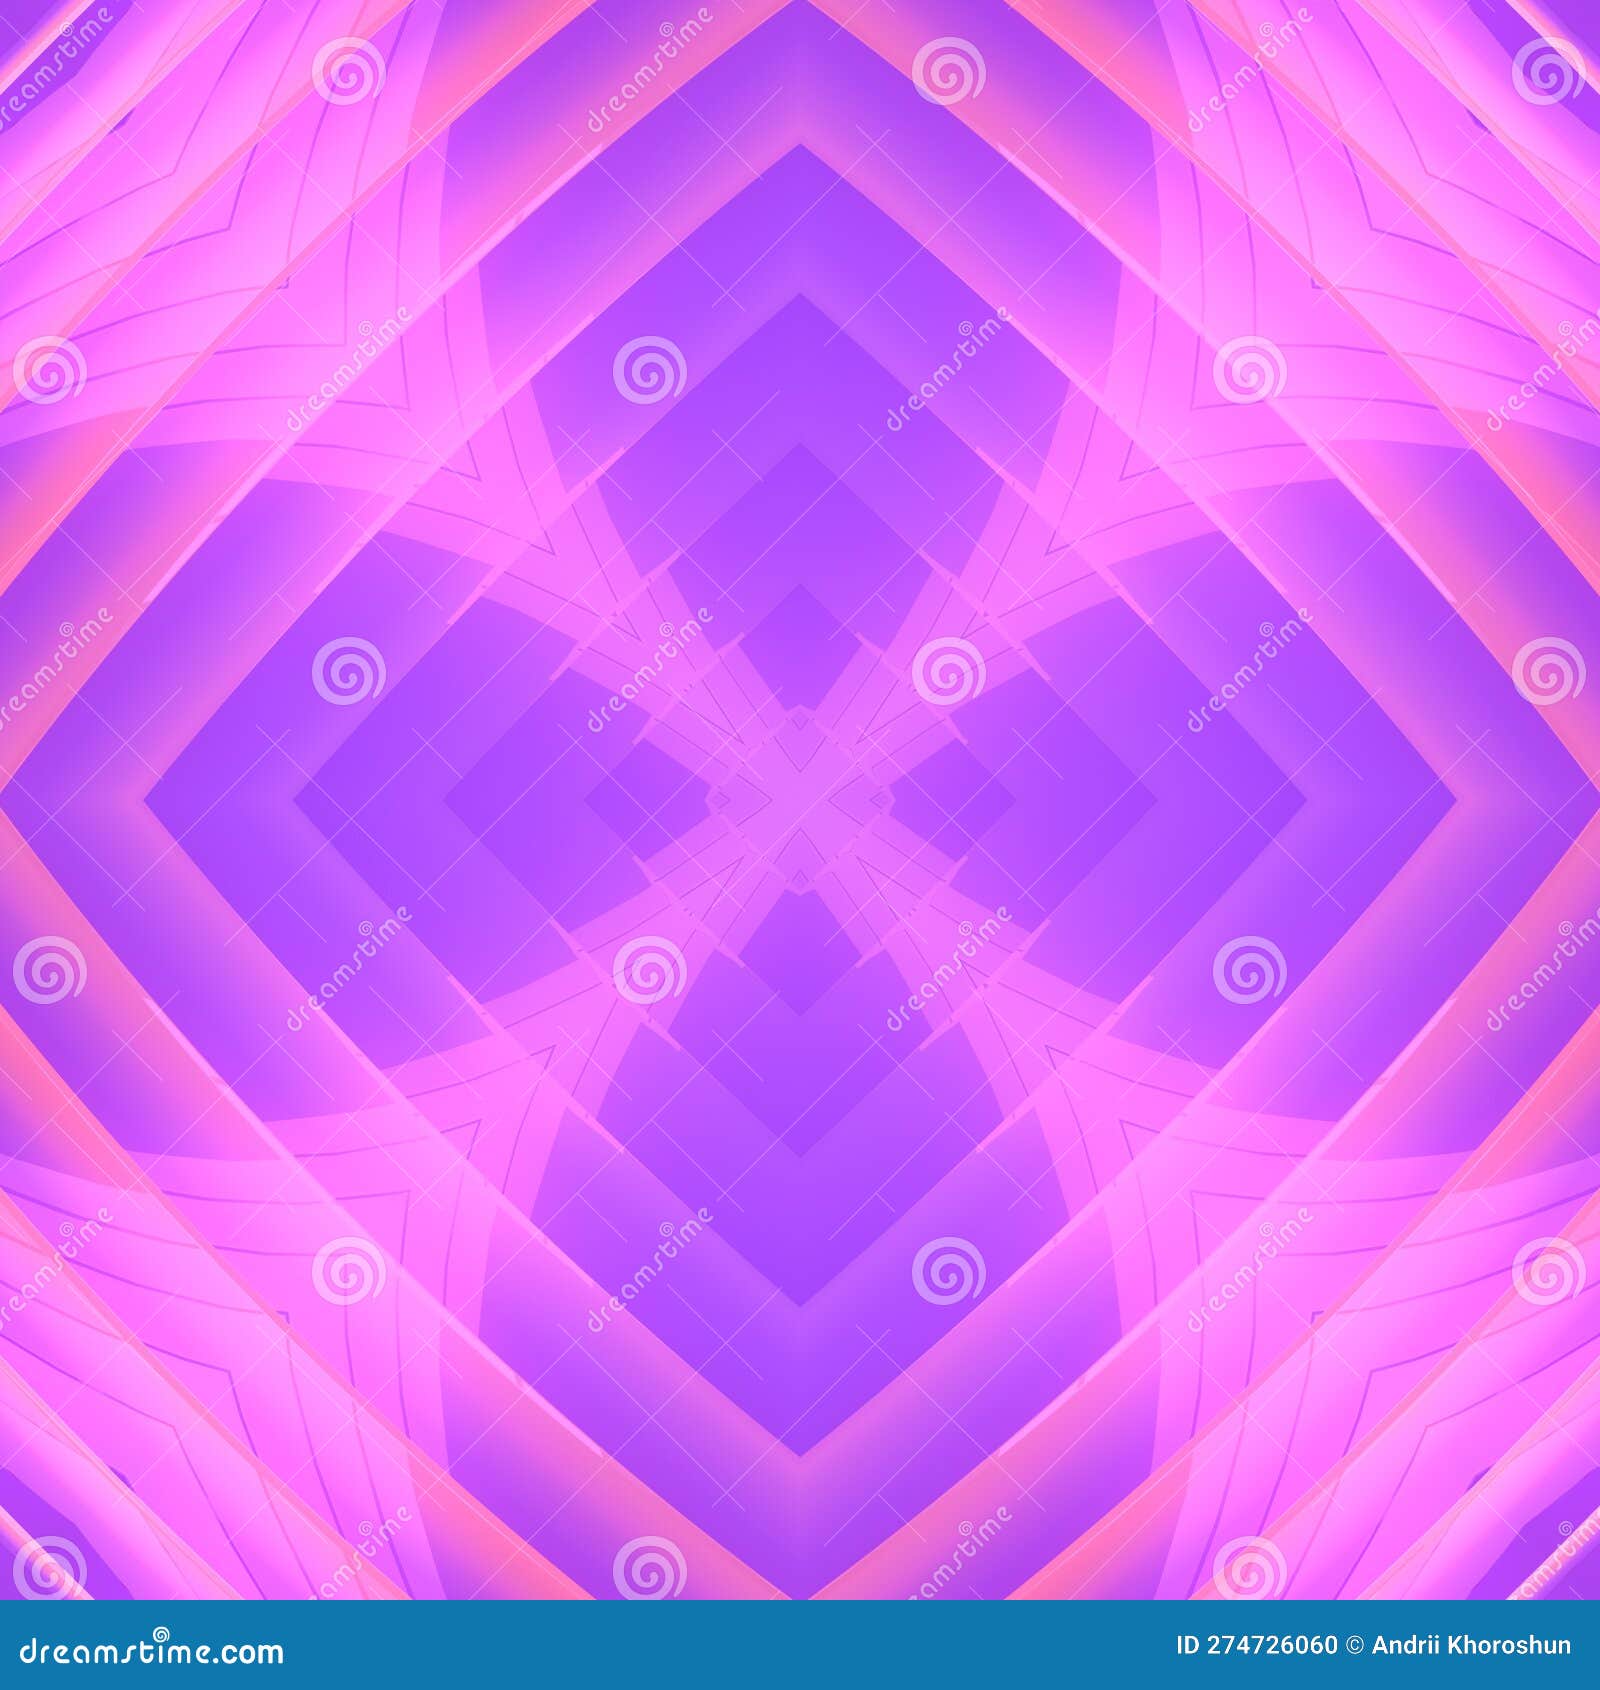 Abstract x-shaped digital illustration with a fancy pink gradient. Modern background. 3d rendering pattern for concept design